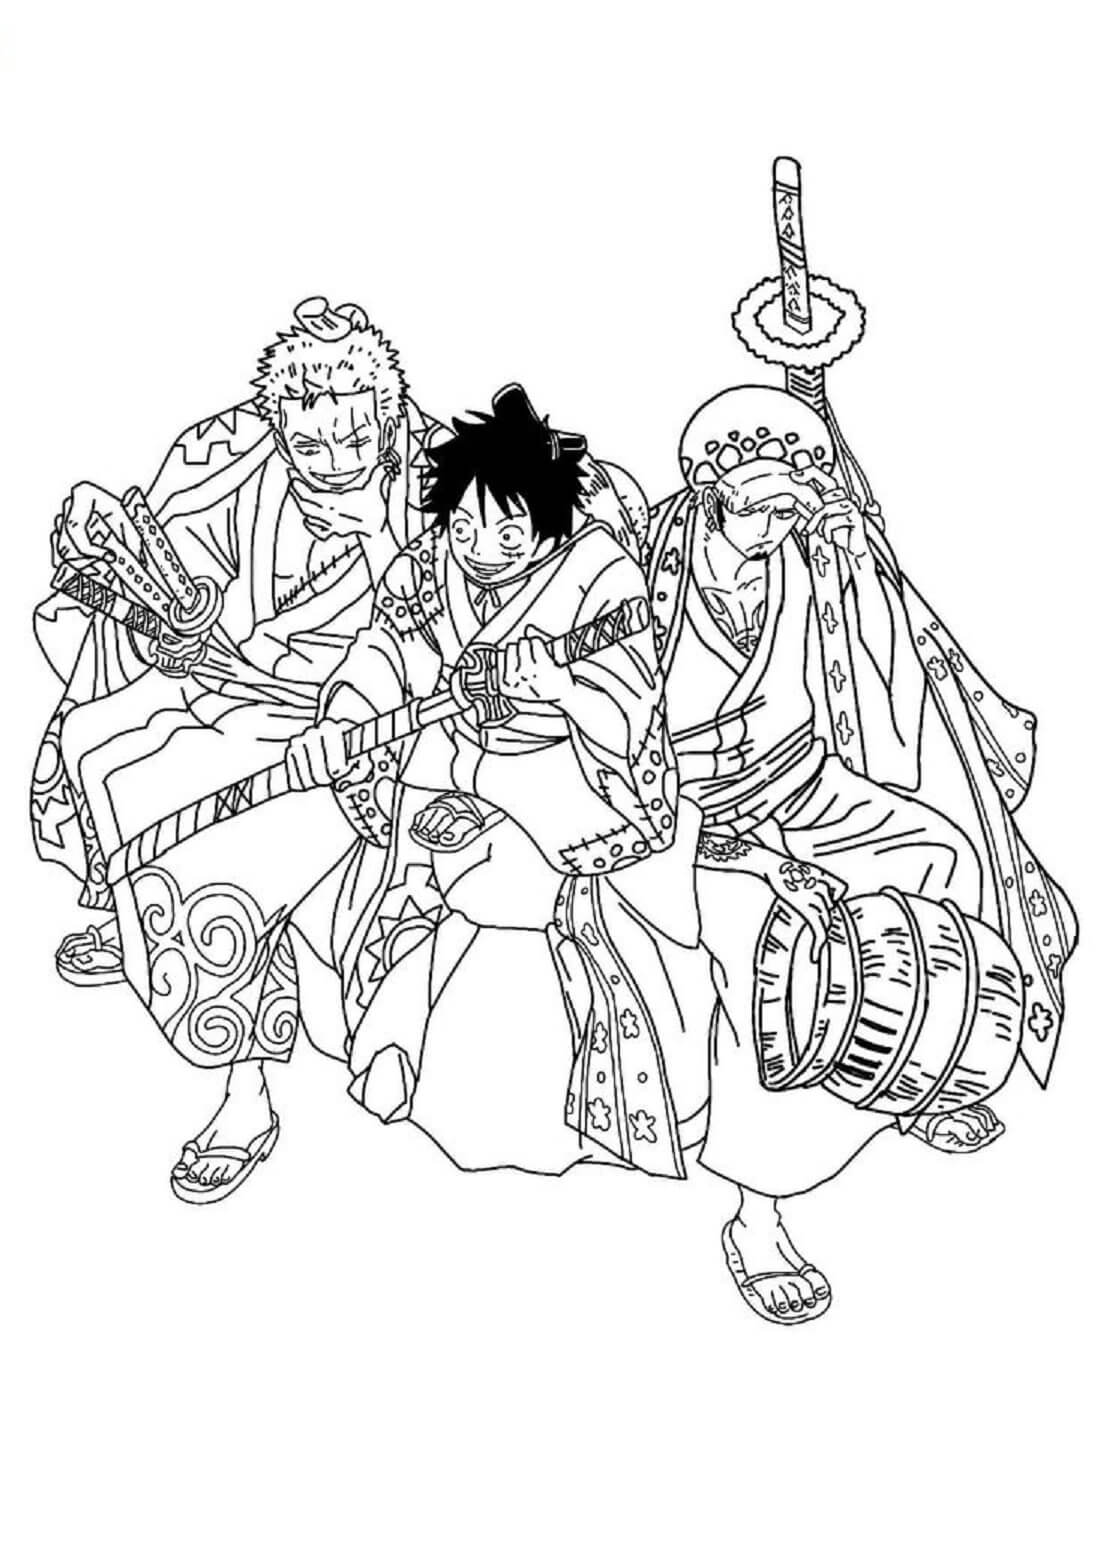 Zoro, Luffy and Law